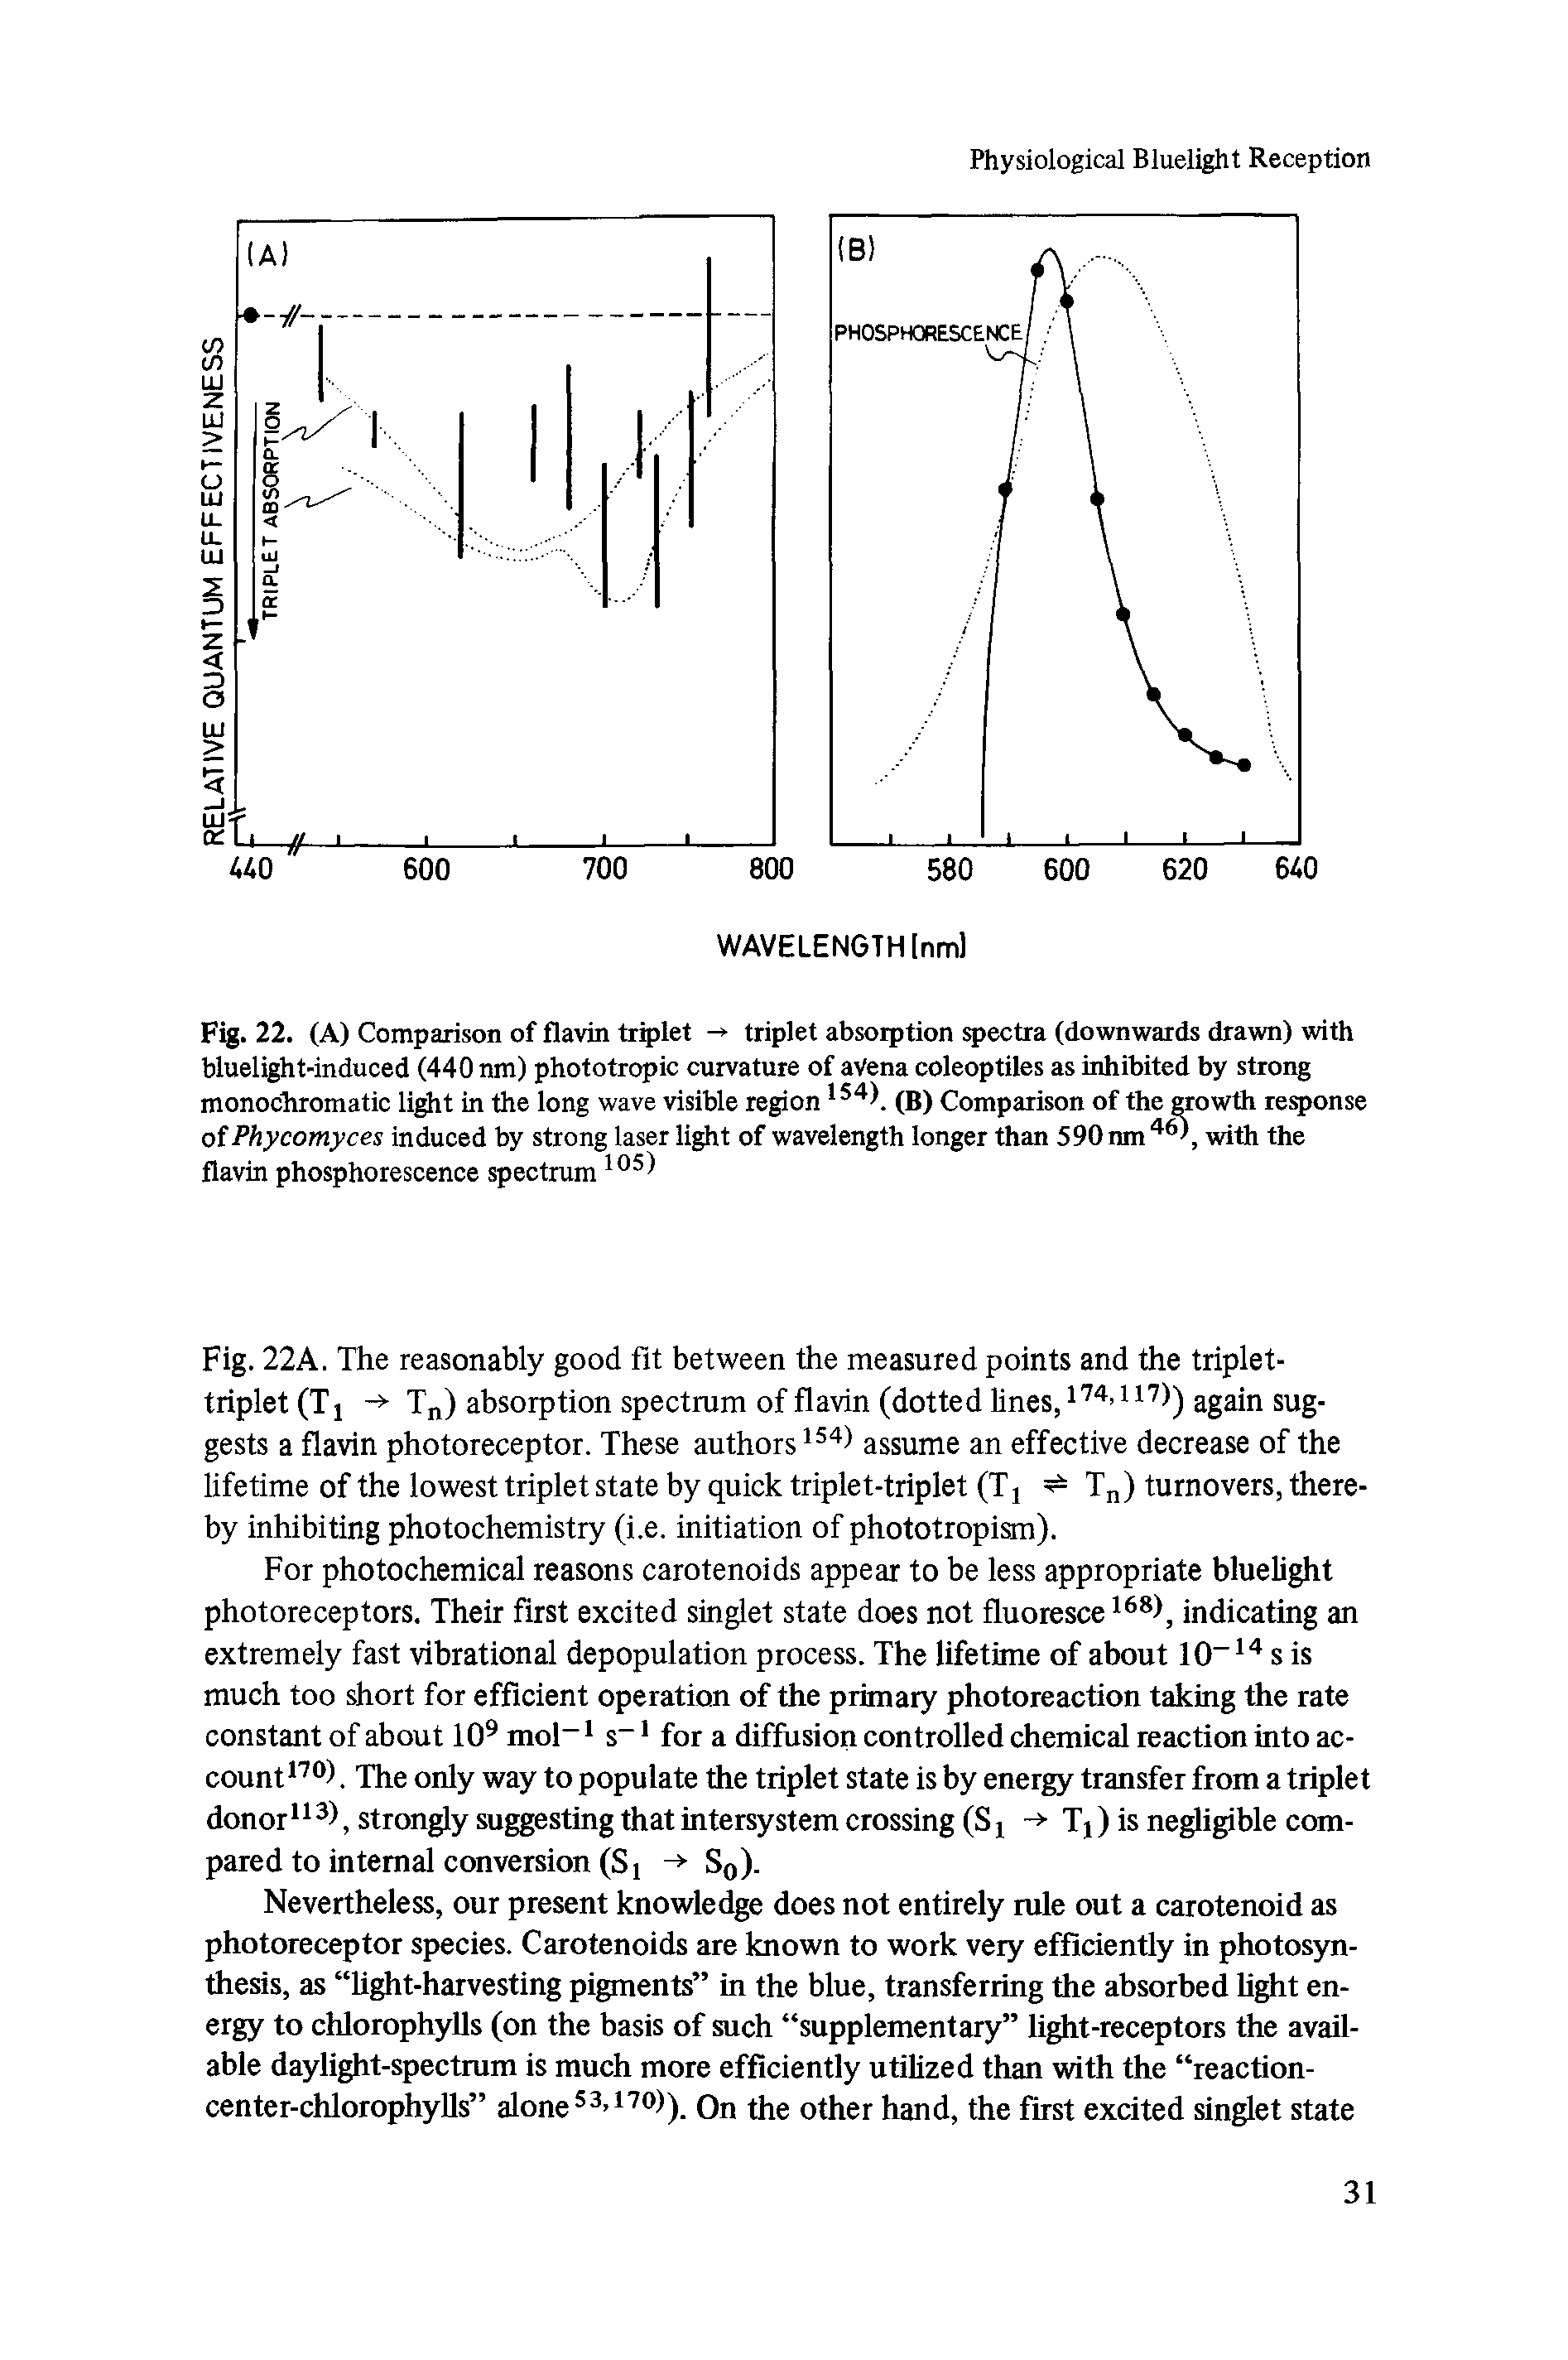 Fig. 22k. The reasonably good fit between the measured points and the triplet-triplet (T i -> Tn) absorption spectrum of flavin (dotted lines, 174>117)) again suggests a flavin photoreceptor. These authorsIS4) assume an effective decrease of the lifetime of the lowest triplet state by quick triplet-triplet (Tj Tn) turnovers, thereby inhibiting photochemistry (i.e. initiation of phototropism).